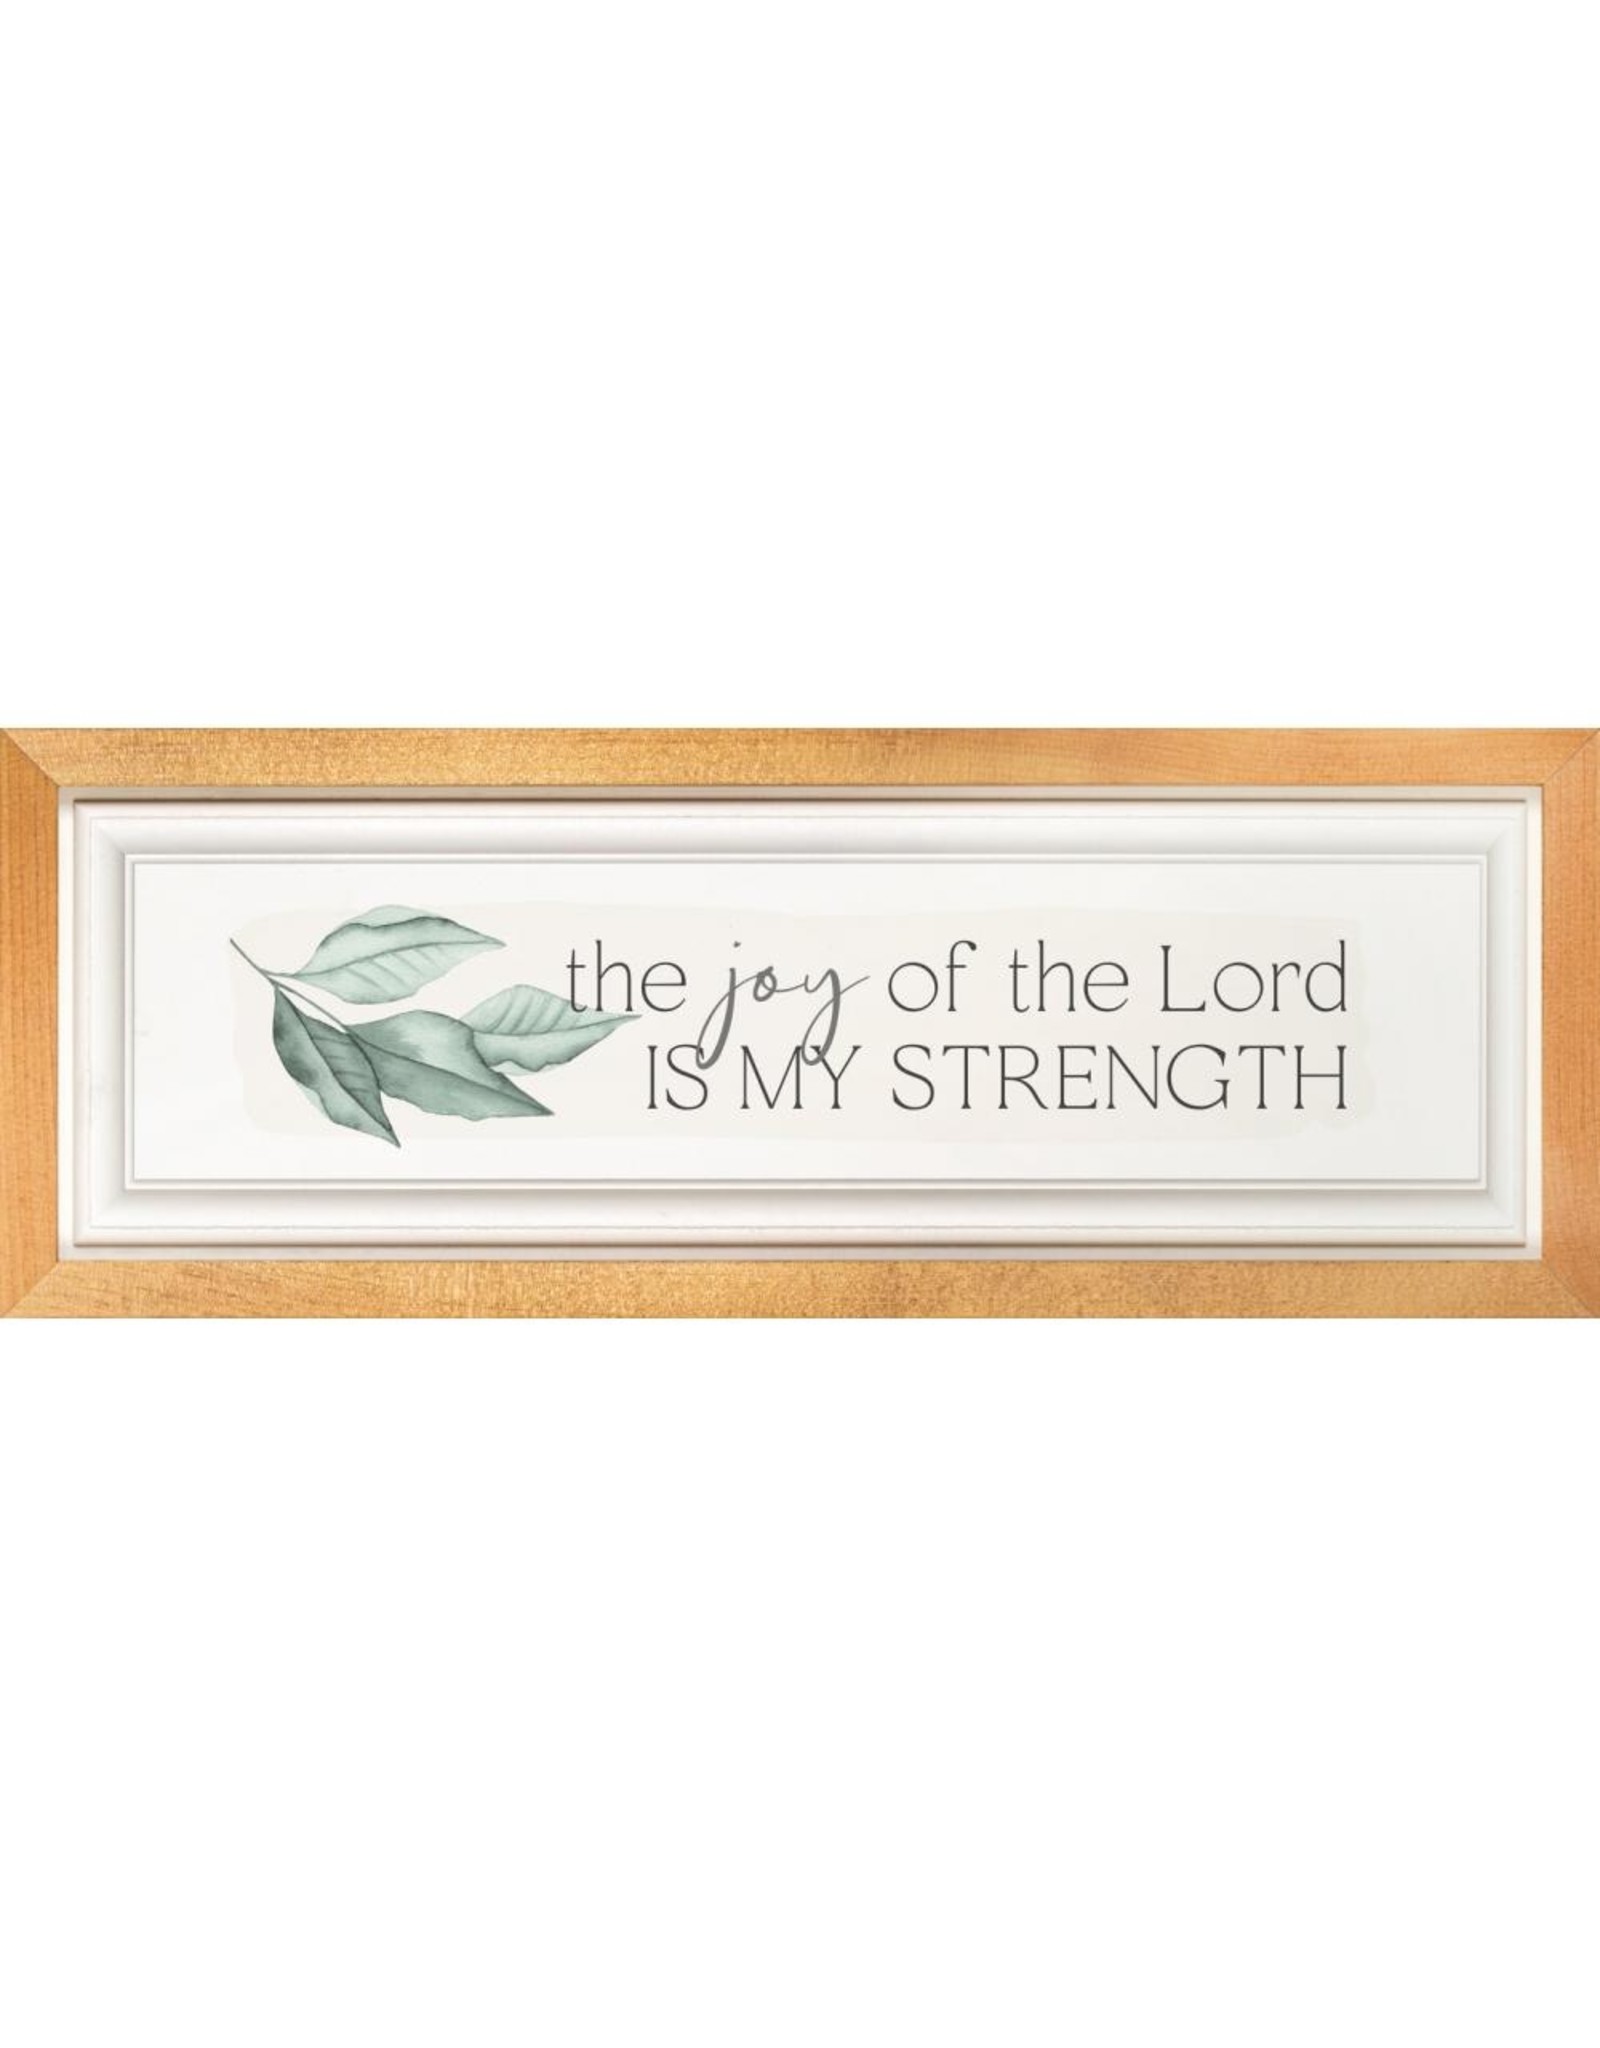 The Joy of the Lord is My Strength Framed Picture 20.75x7.75